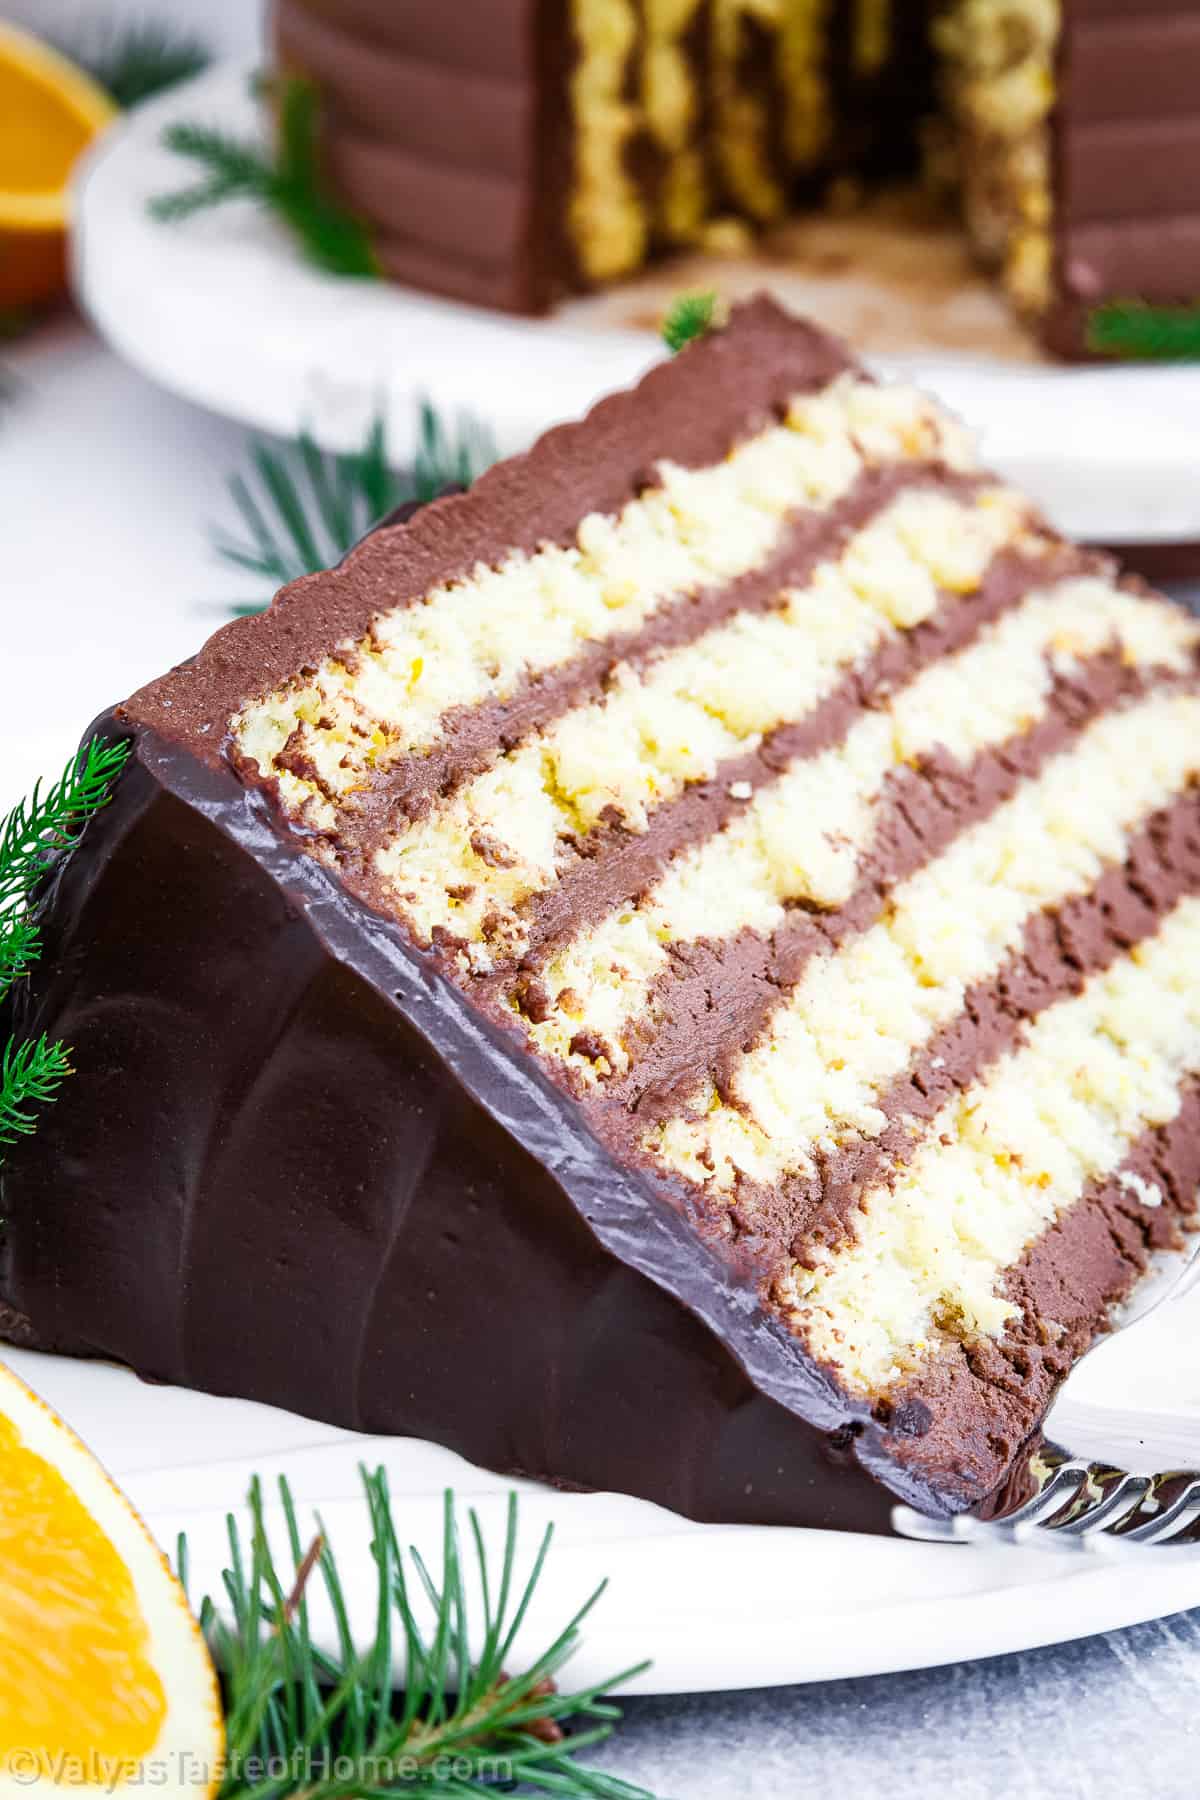 This delicious cake features a blend of chocolate and orange, creating a burst of flavor in every bite.